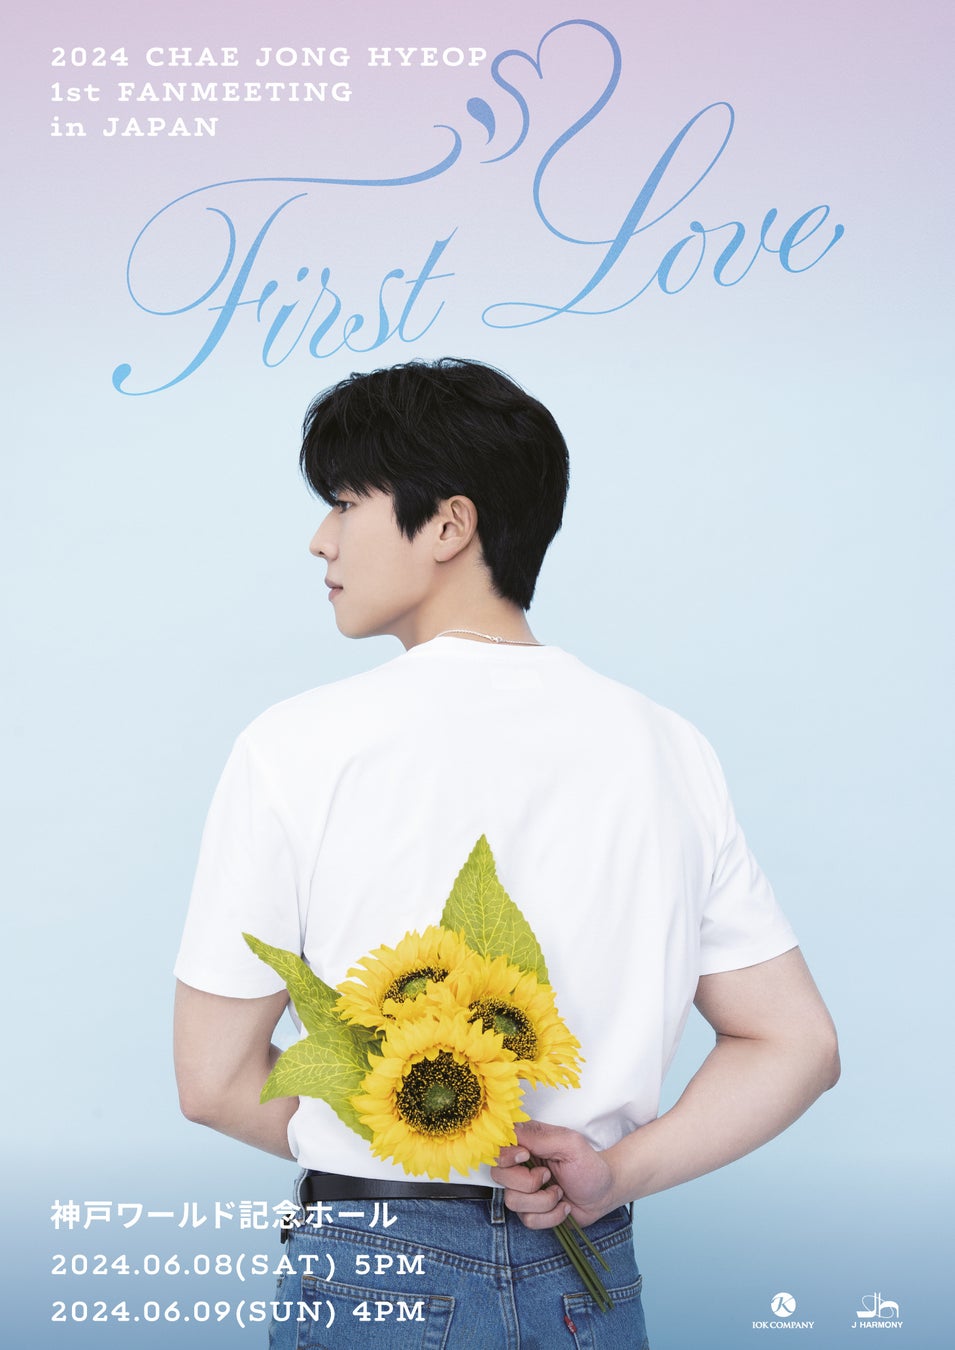 2024 CHAE JONG HYEOP 1st FANMEETING in JAPAN [First Love]追加公演開催決定！